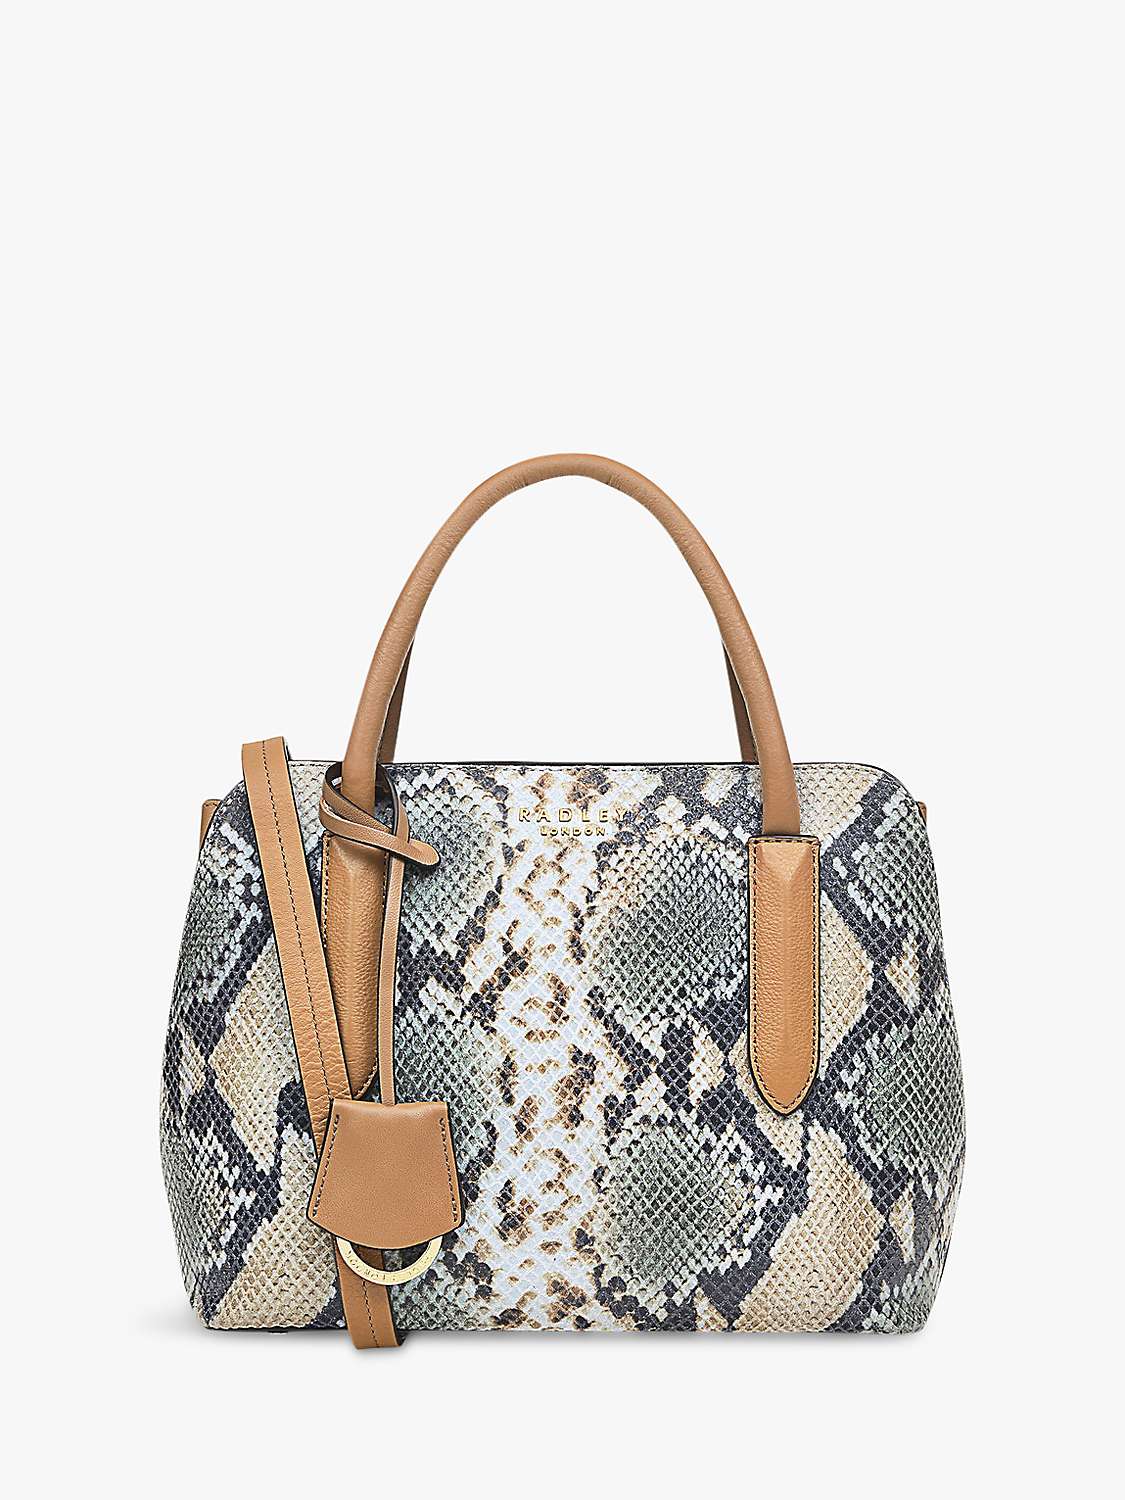 Radley Liverpool Street 2.0 Leather Small Multiway Bag, Butterscotch/Snake  at John Lewis & Partners